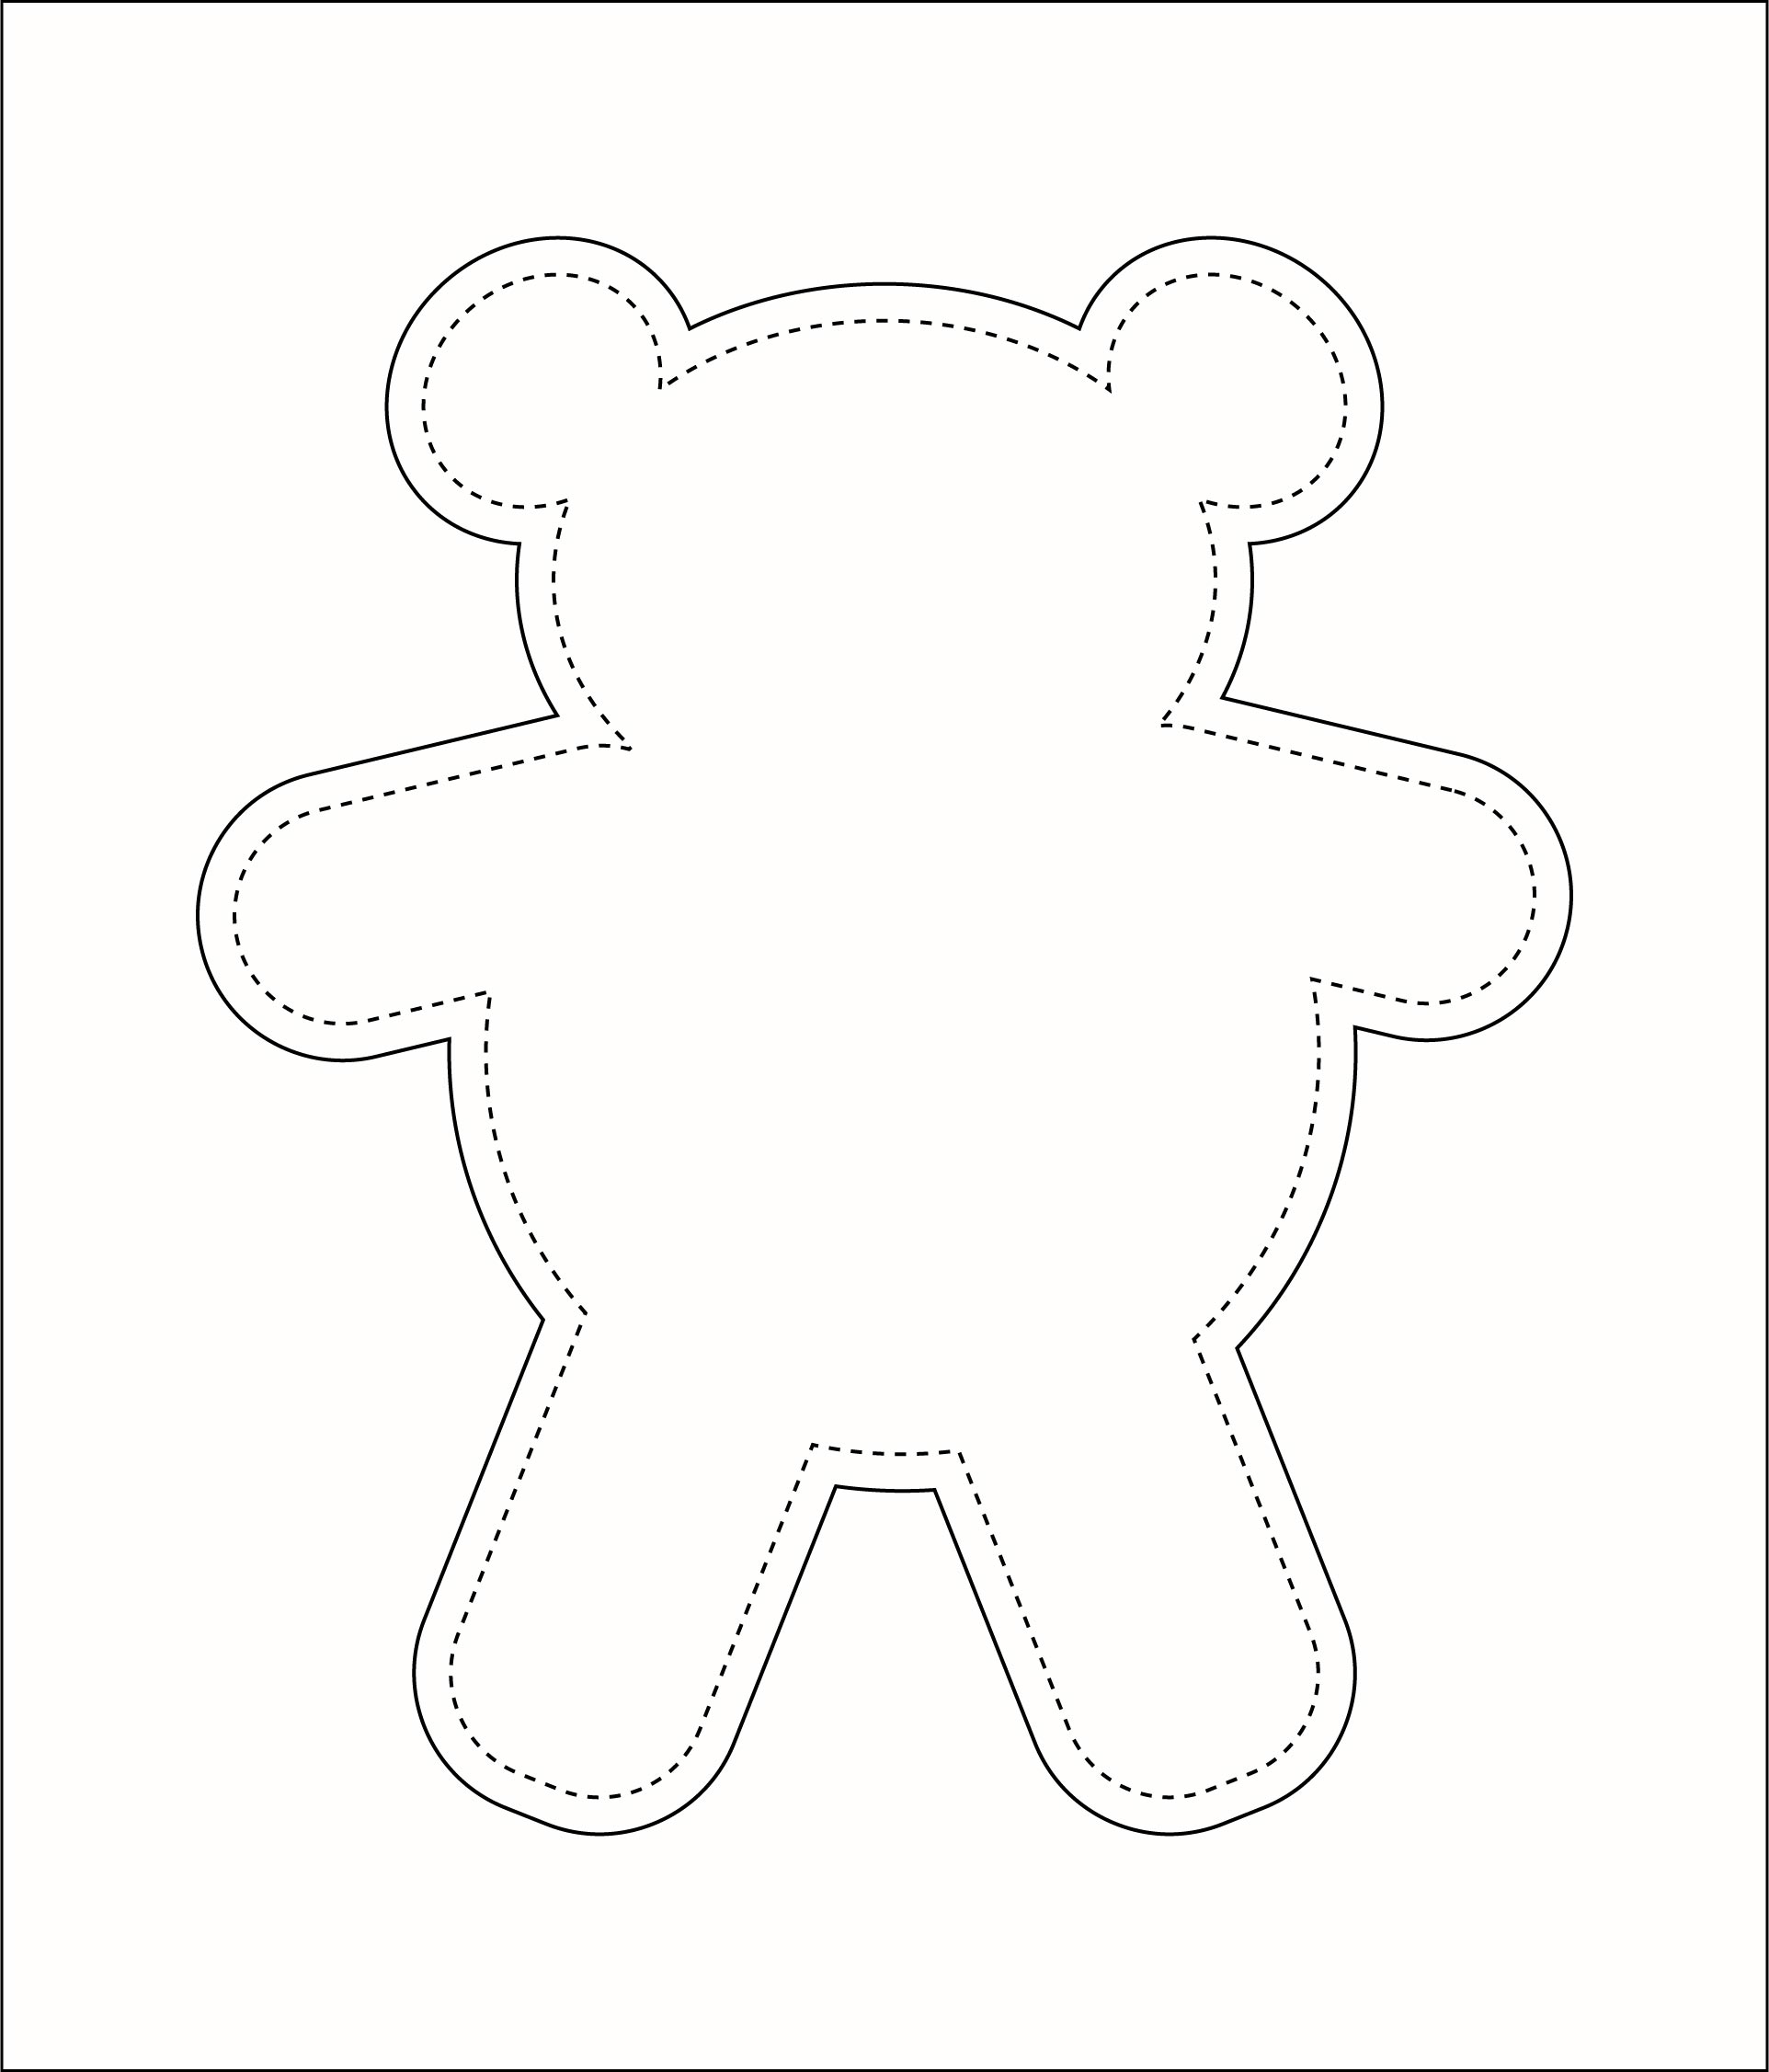 37+ Free Teddy Bear Patterns For Sewing